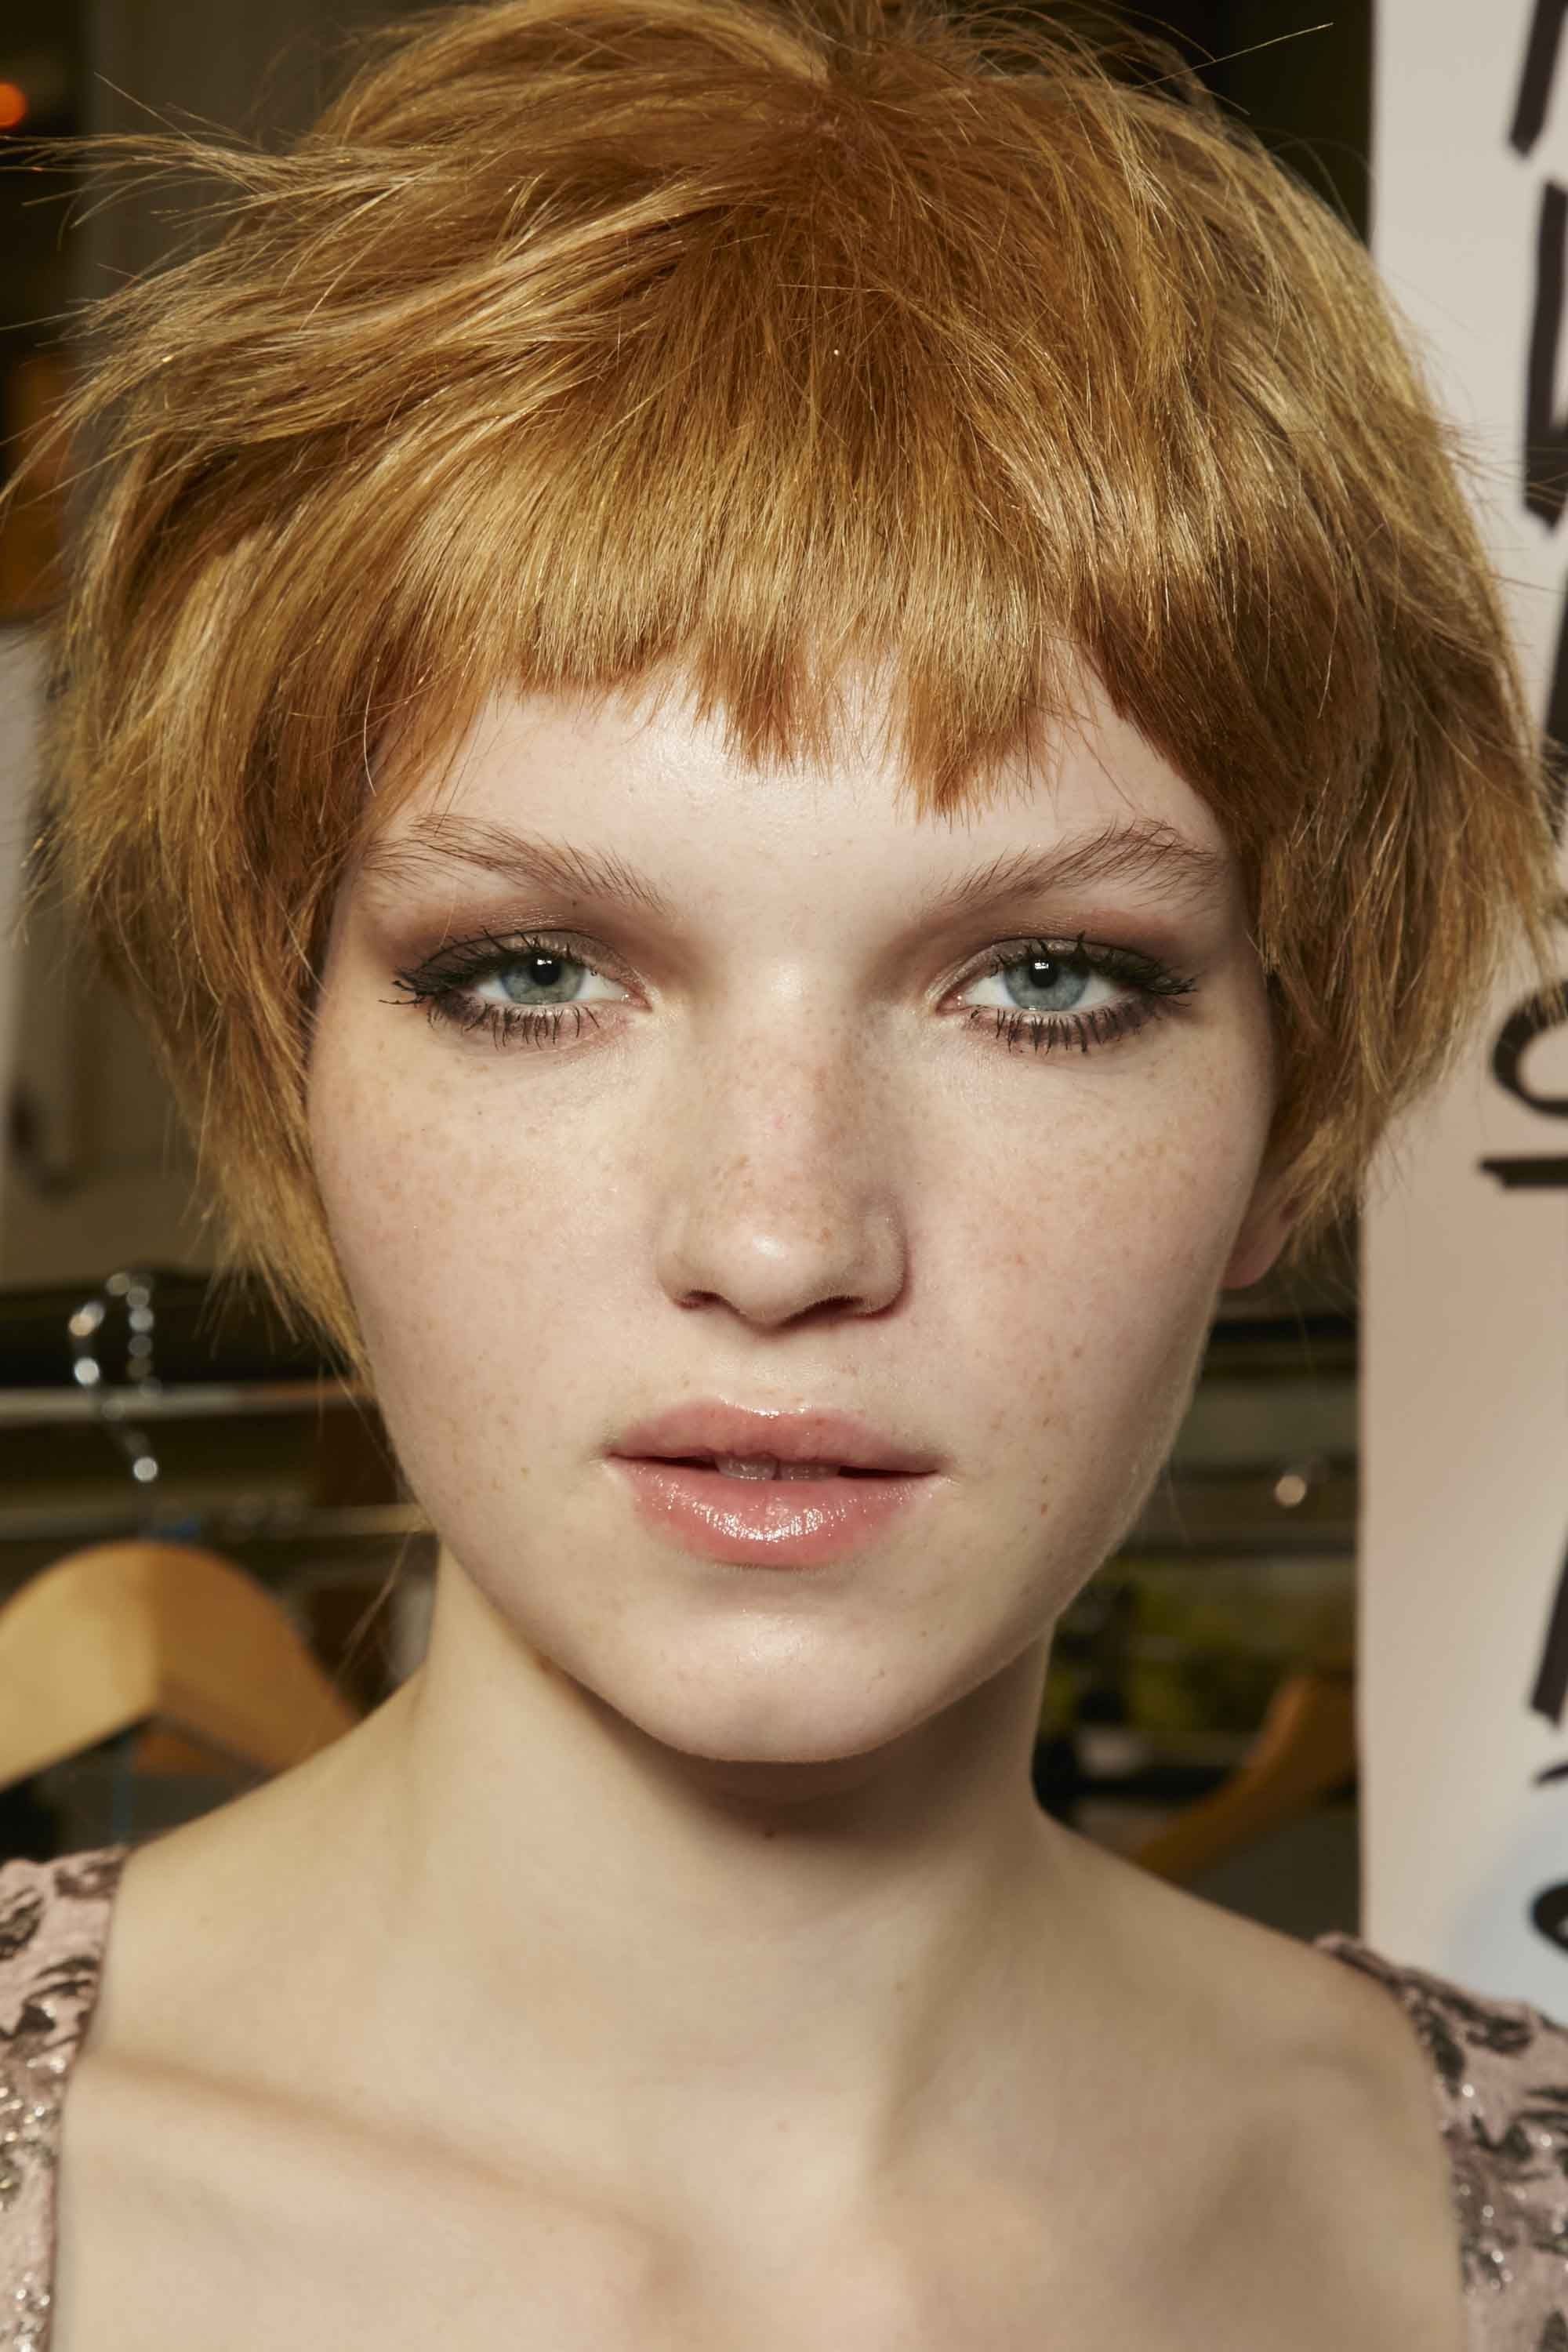 Pixie Cuts For Oval Faces: 5 Directional Looks To Try Now Intended For Most Recent Choppy Pixie Haircuts With Side Bangs (View 6 of 15)